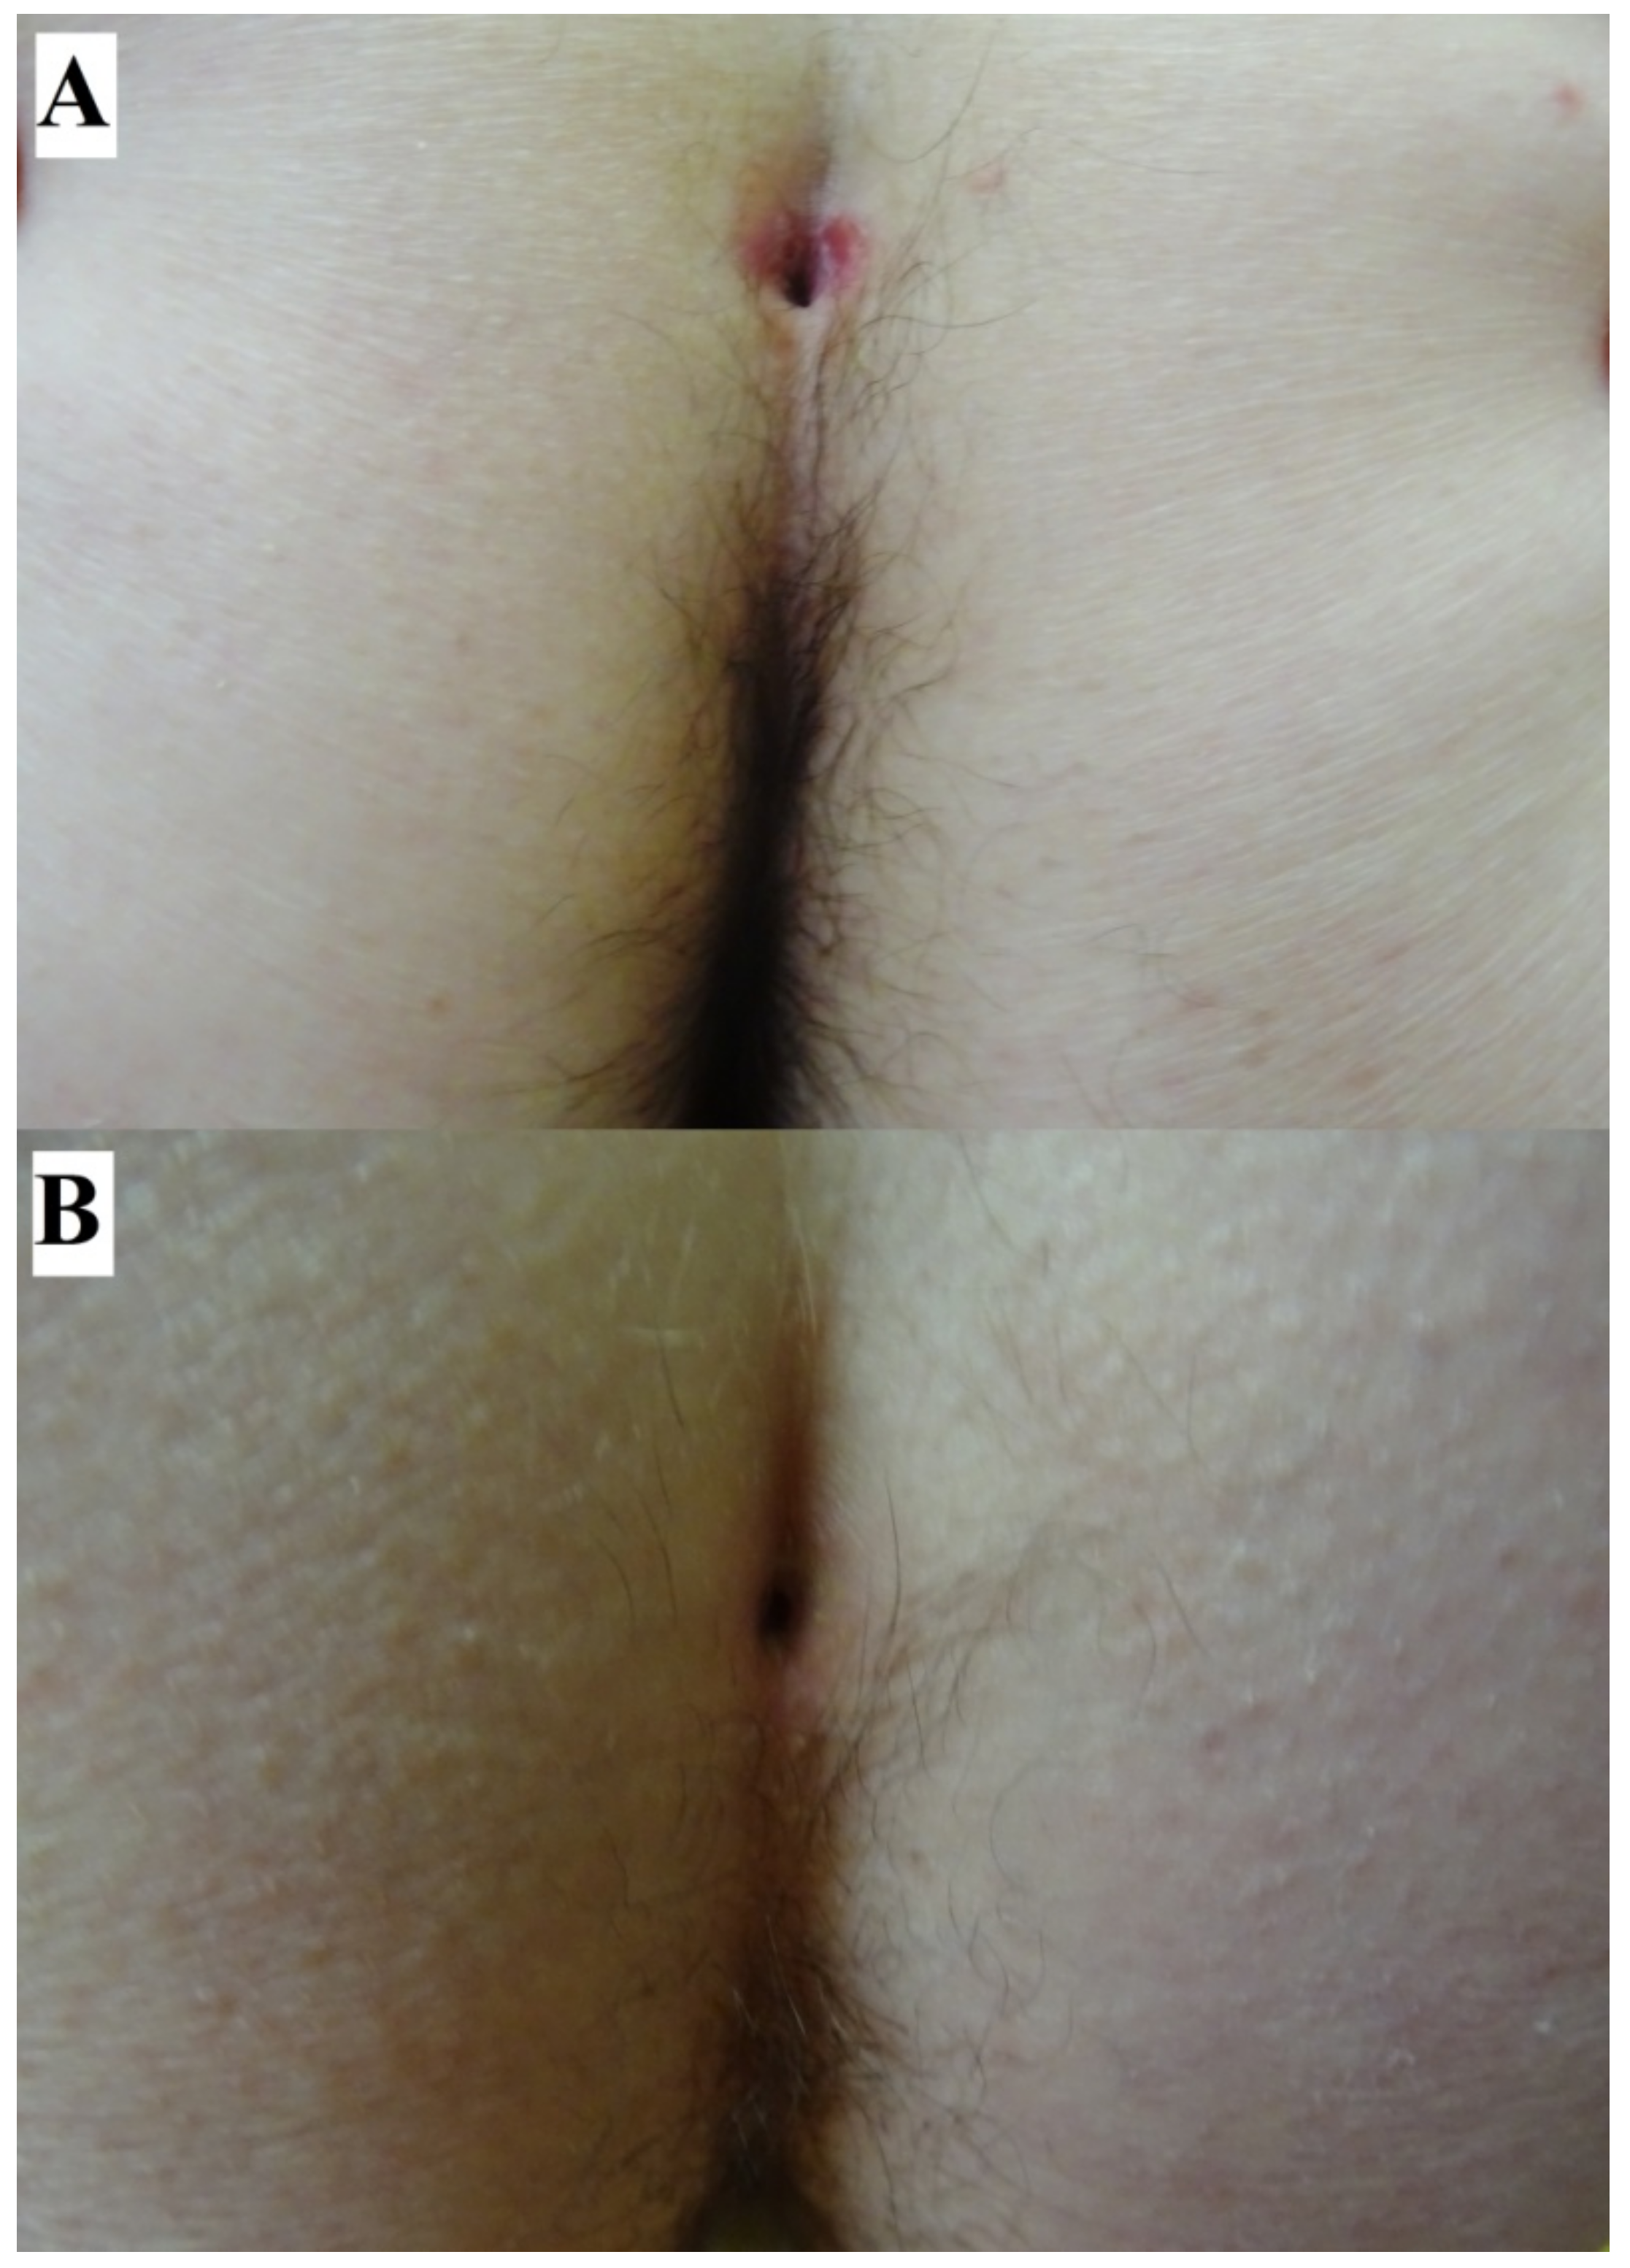 JCM | Free Full-Text | Sacral Dimple, Conjunctiva, and Nipple as Less  Obvious Pemphigus Vulgaris Locations around Natural Body Orifices: A Report  of Three Cases